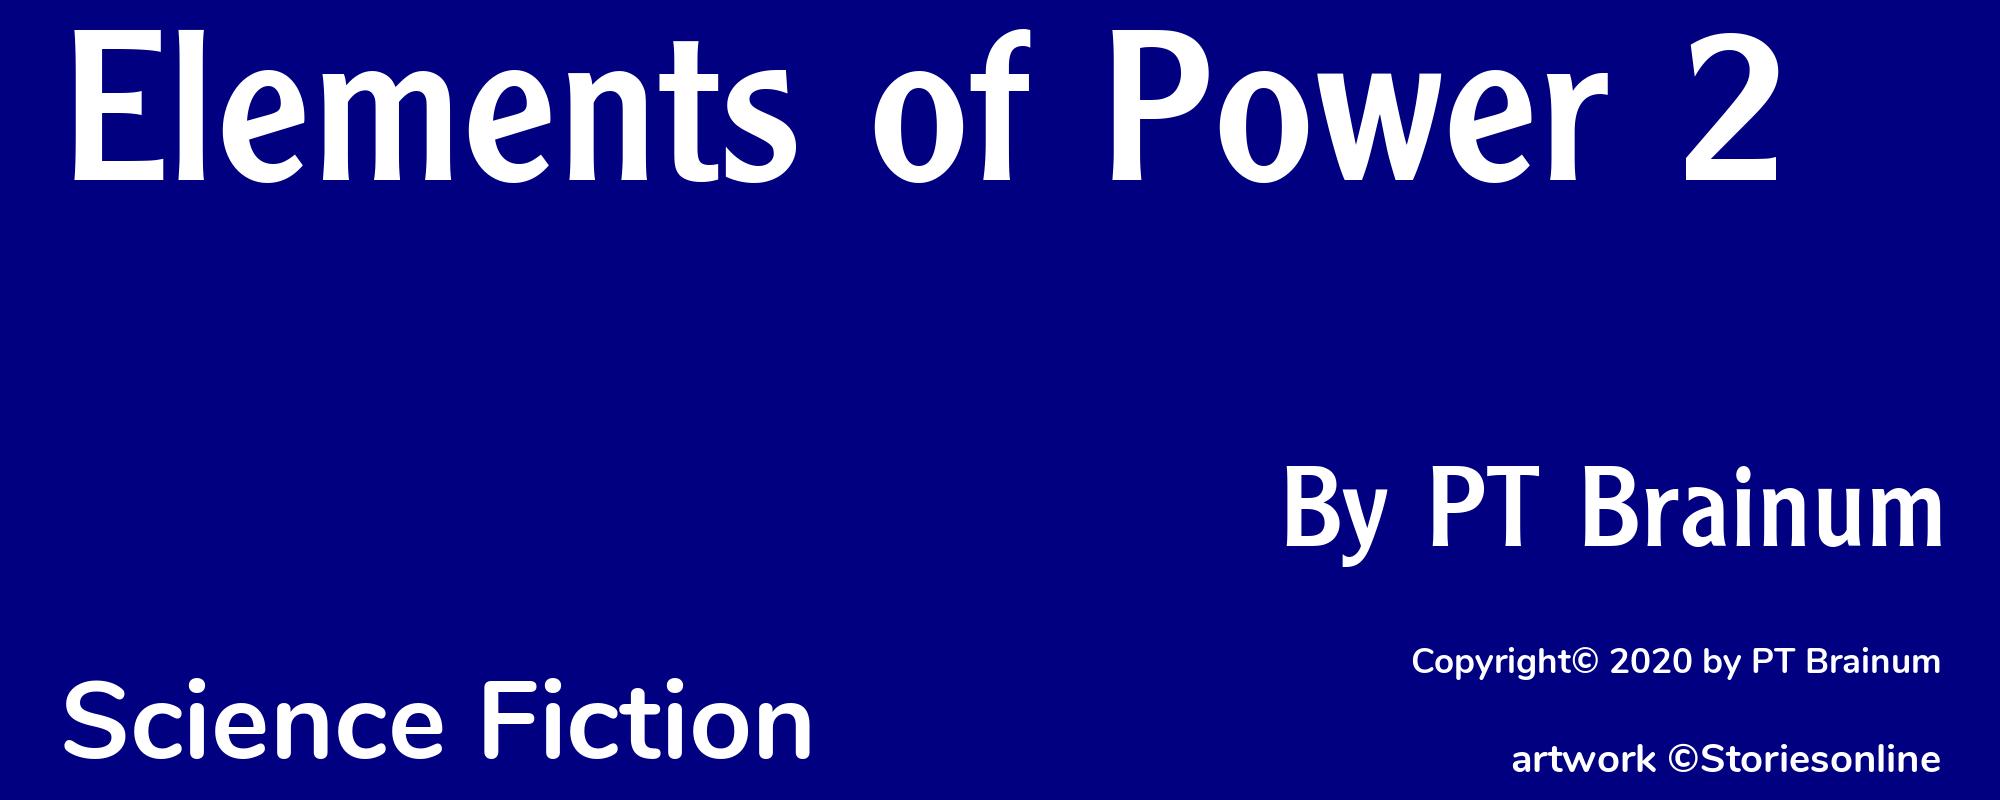 Elements of Power 2 - Cover